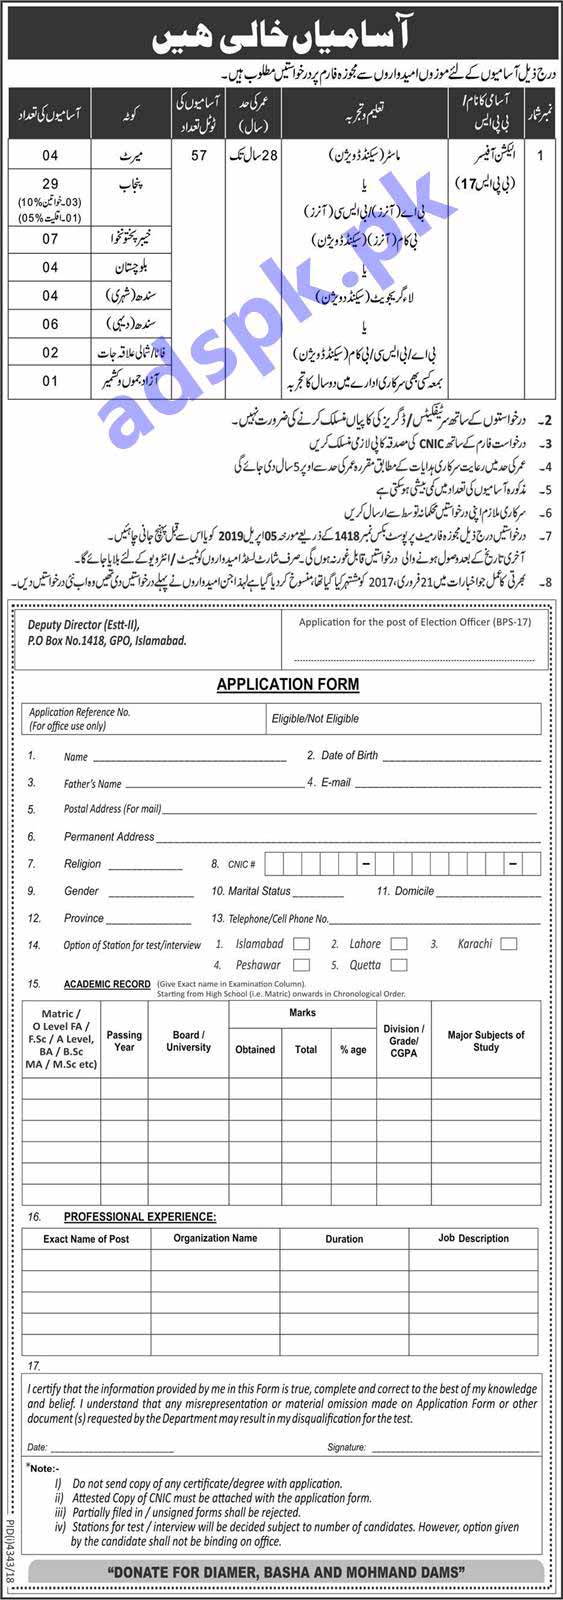 57 Election Officer Jobs PO Box 1418 GPO Islamabad Jobs 2019 for Election Officer Jobs Application Form Deadline 05-04-2019 Apply Now